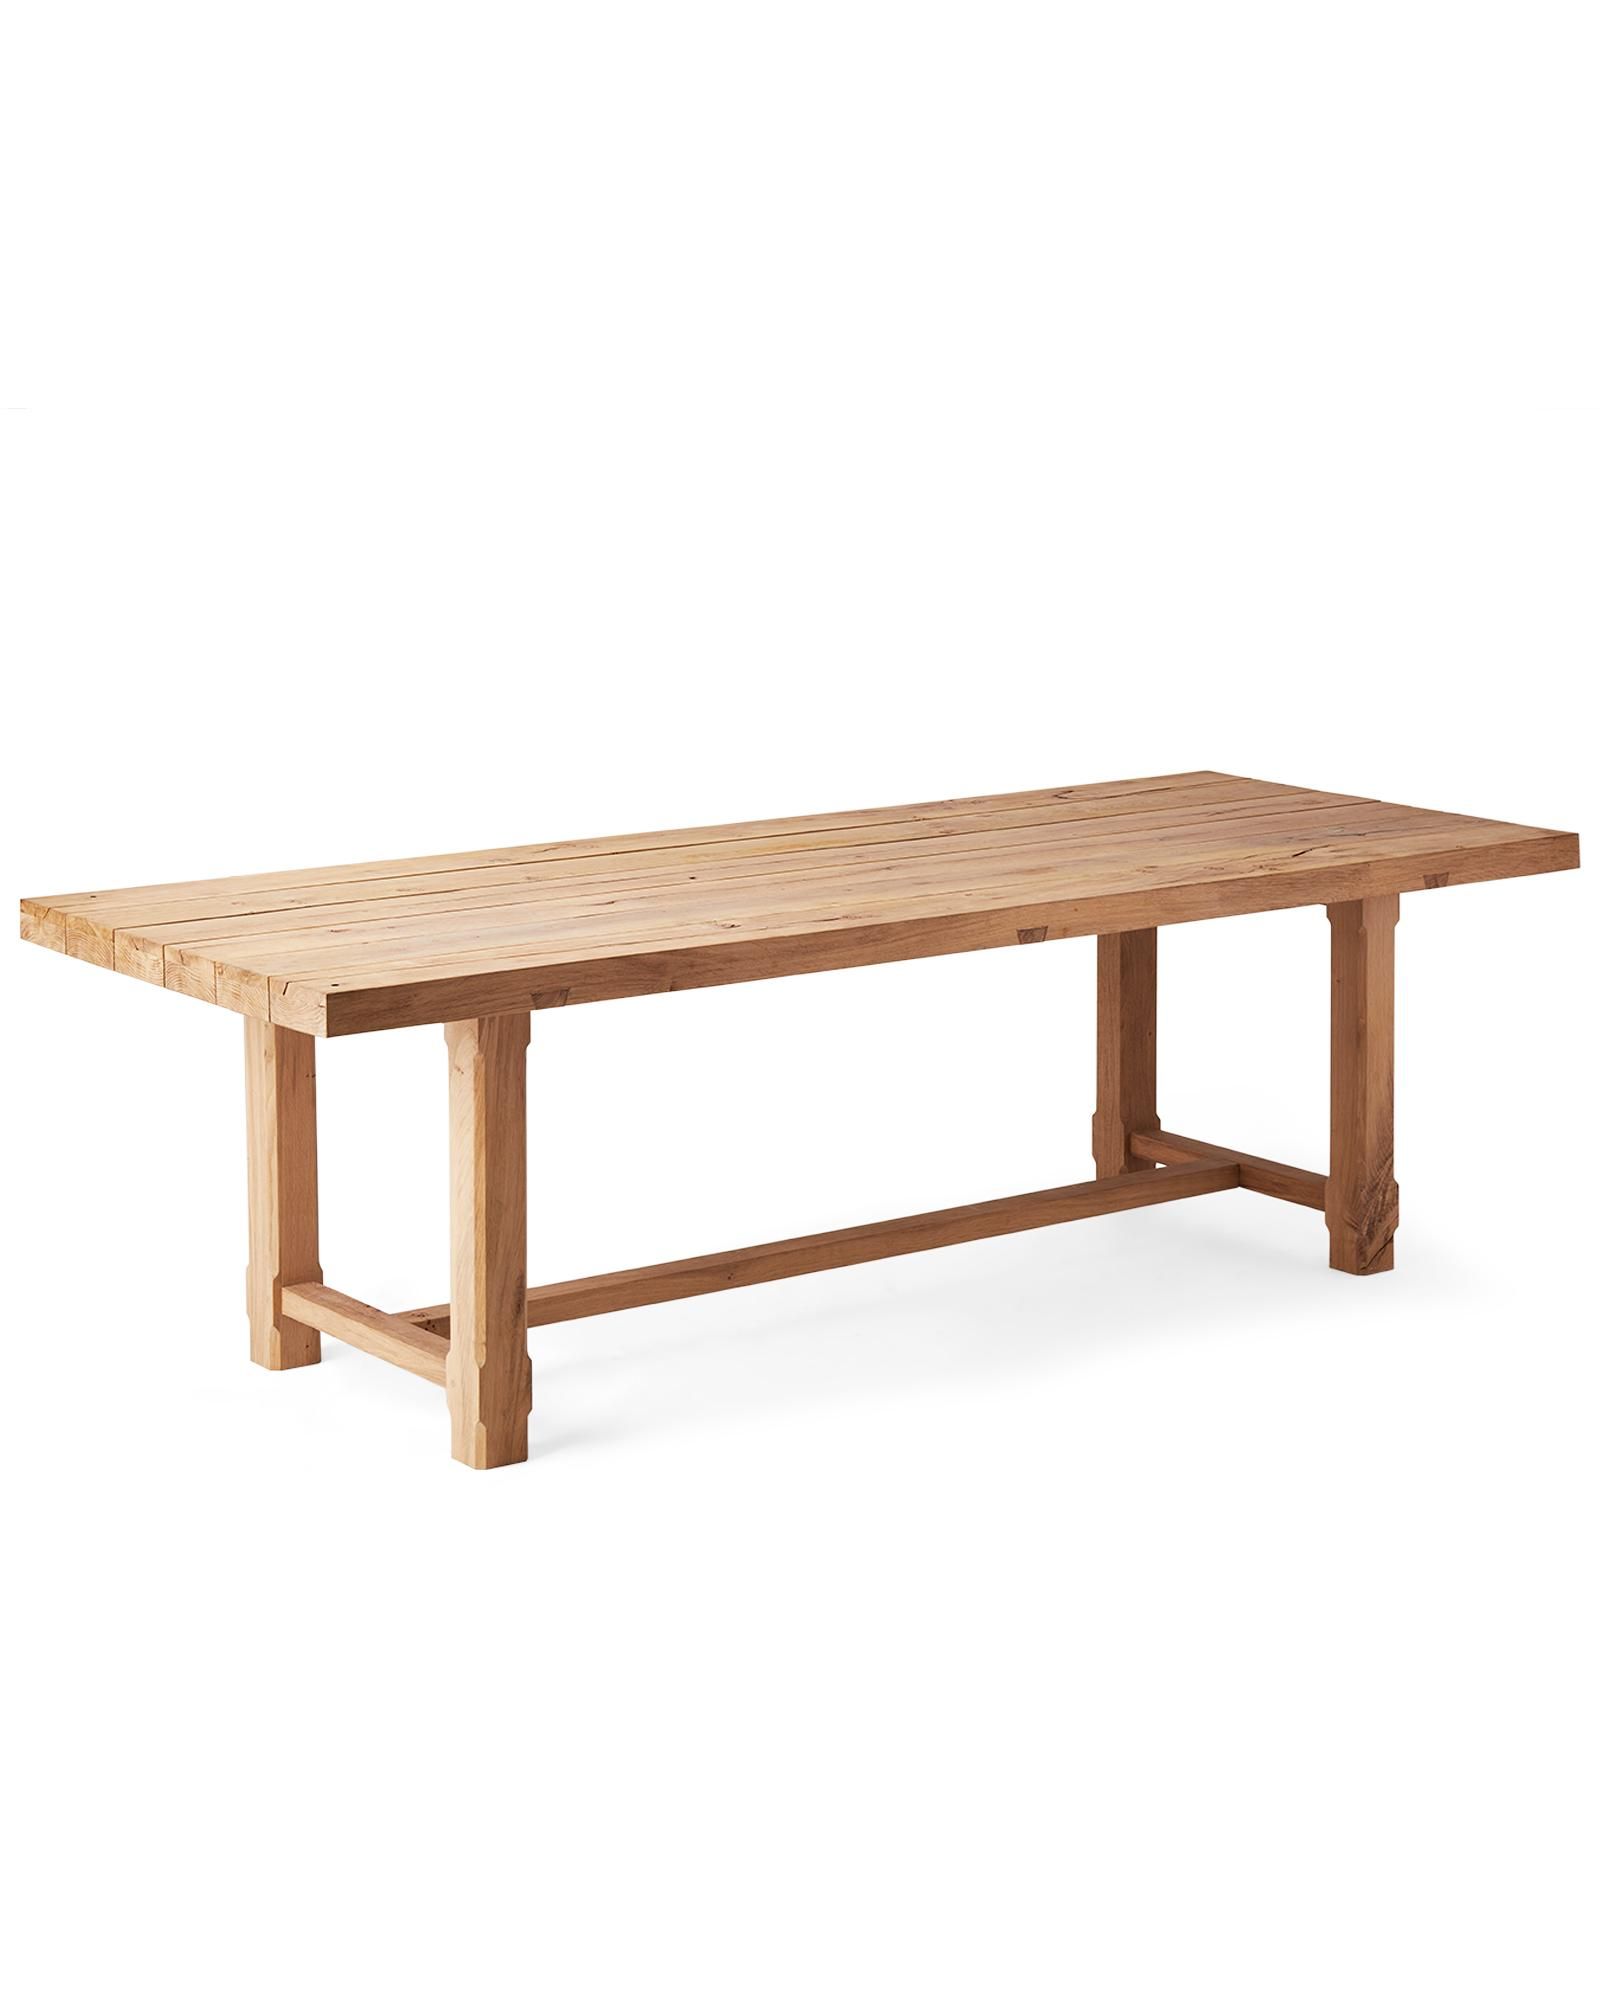 Stinson Dining Table | Serena and Lily